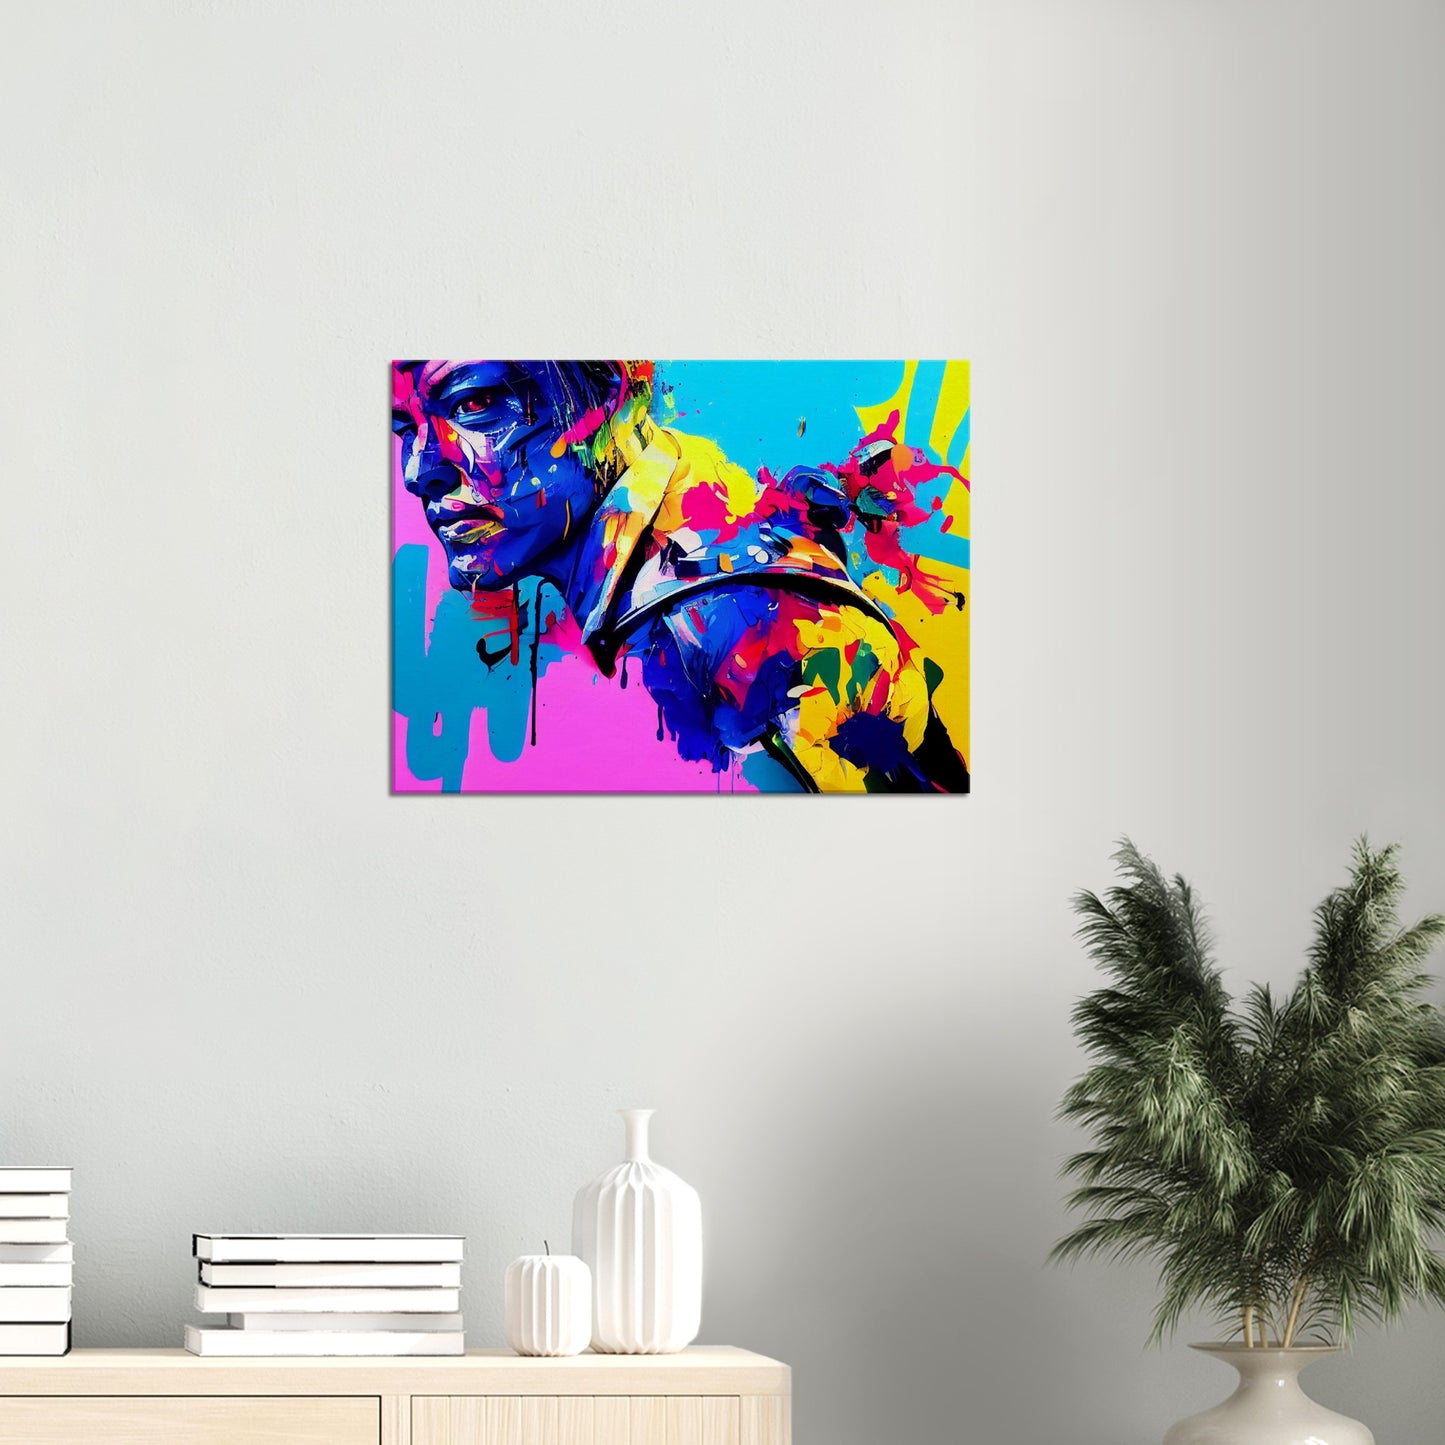 Abstract watching man - Urban Art on Canvas